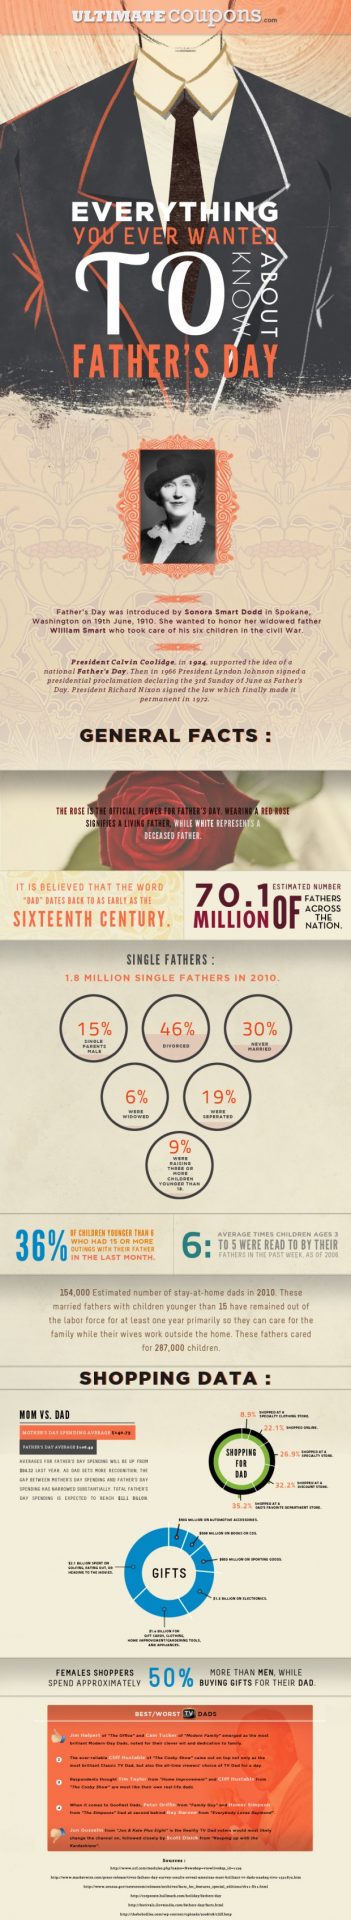 fathersday-infographic-e1308382216581.jpg